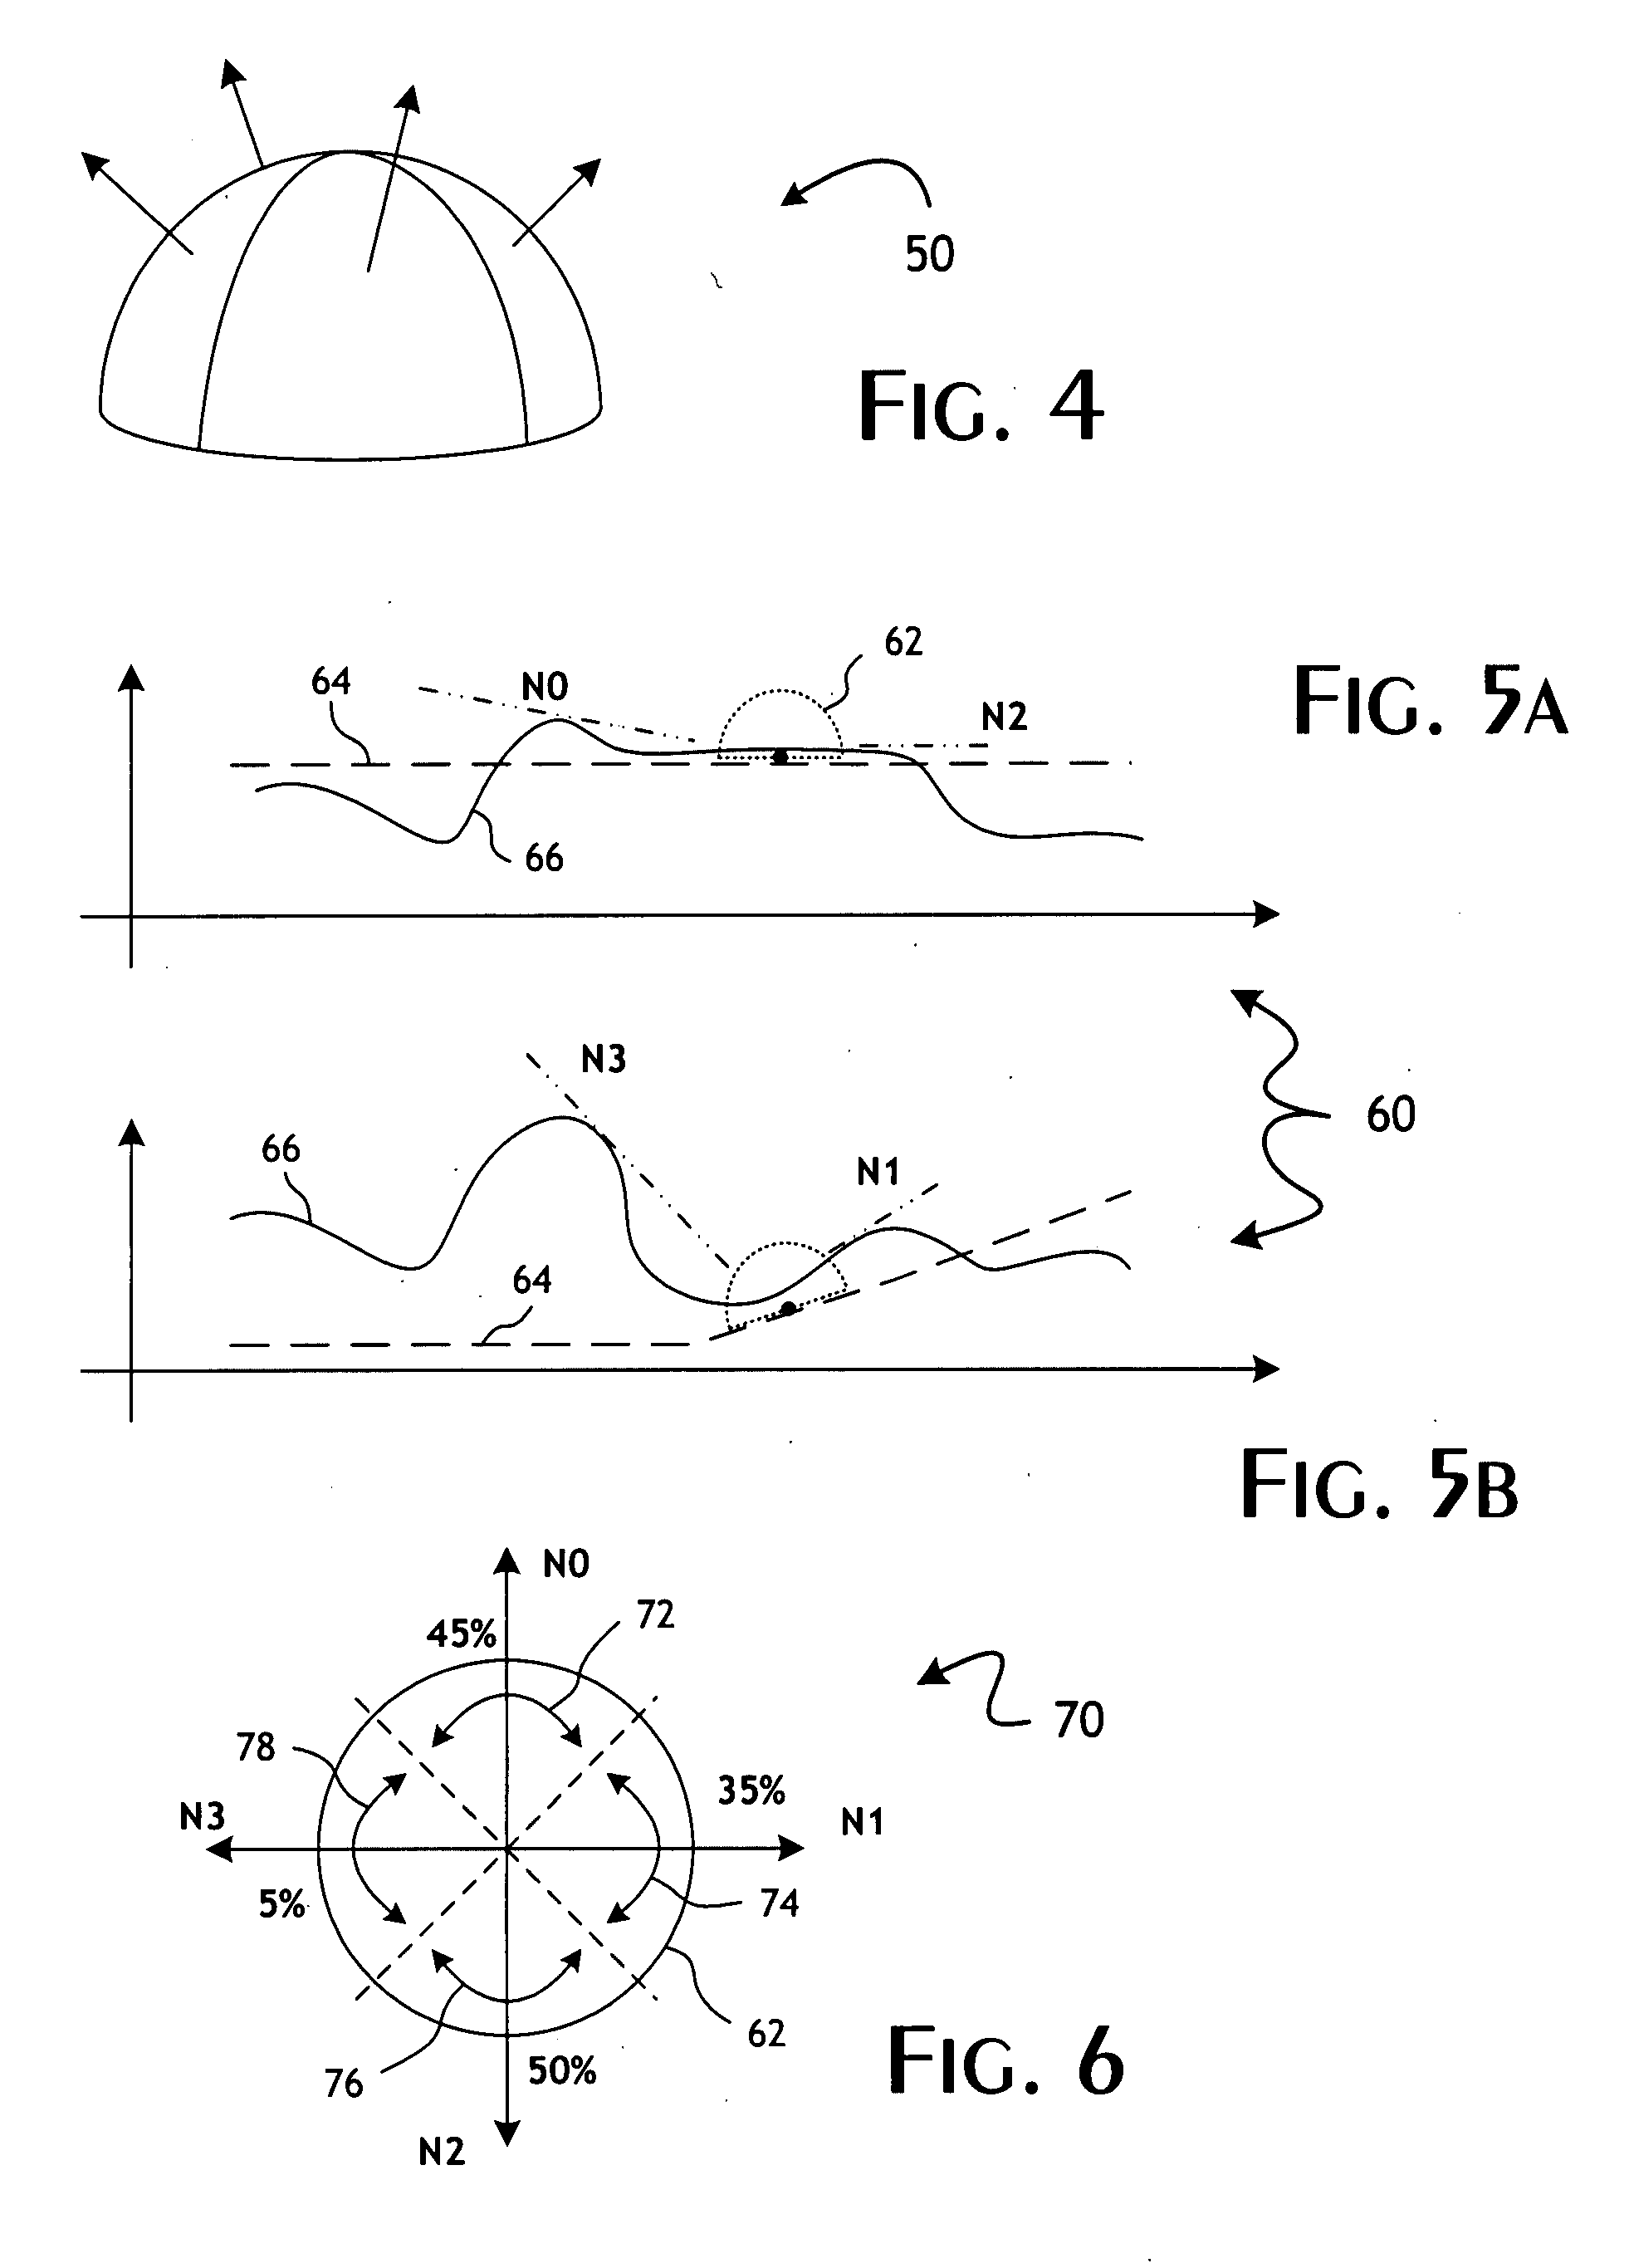 System and methods for real-time rendering of deformable geometry with global illumination